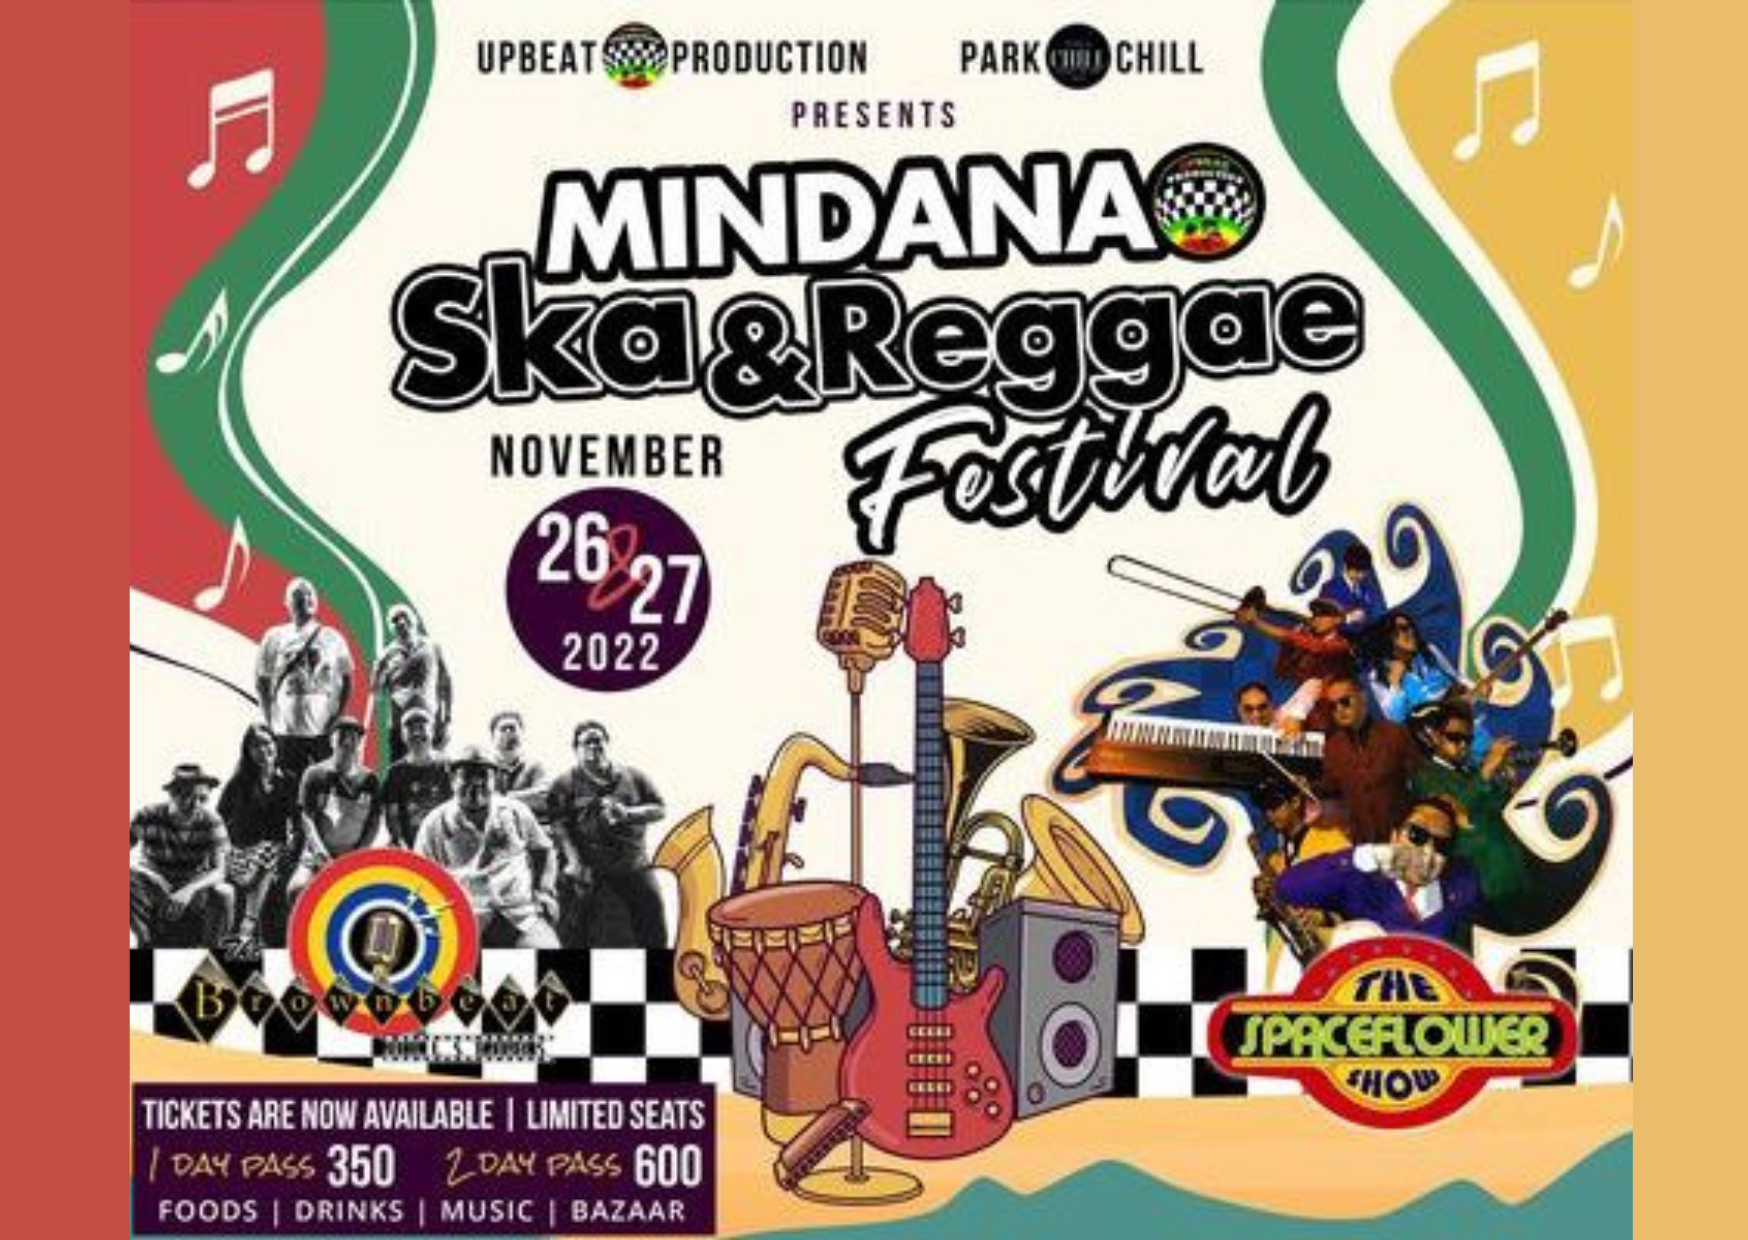 Skank Your Night Away at the Mindanao Ska & Reggae Festival Ft. The Brownbeat AllStars, The Spaceflower Show, and Many More!